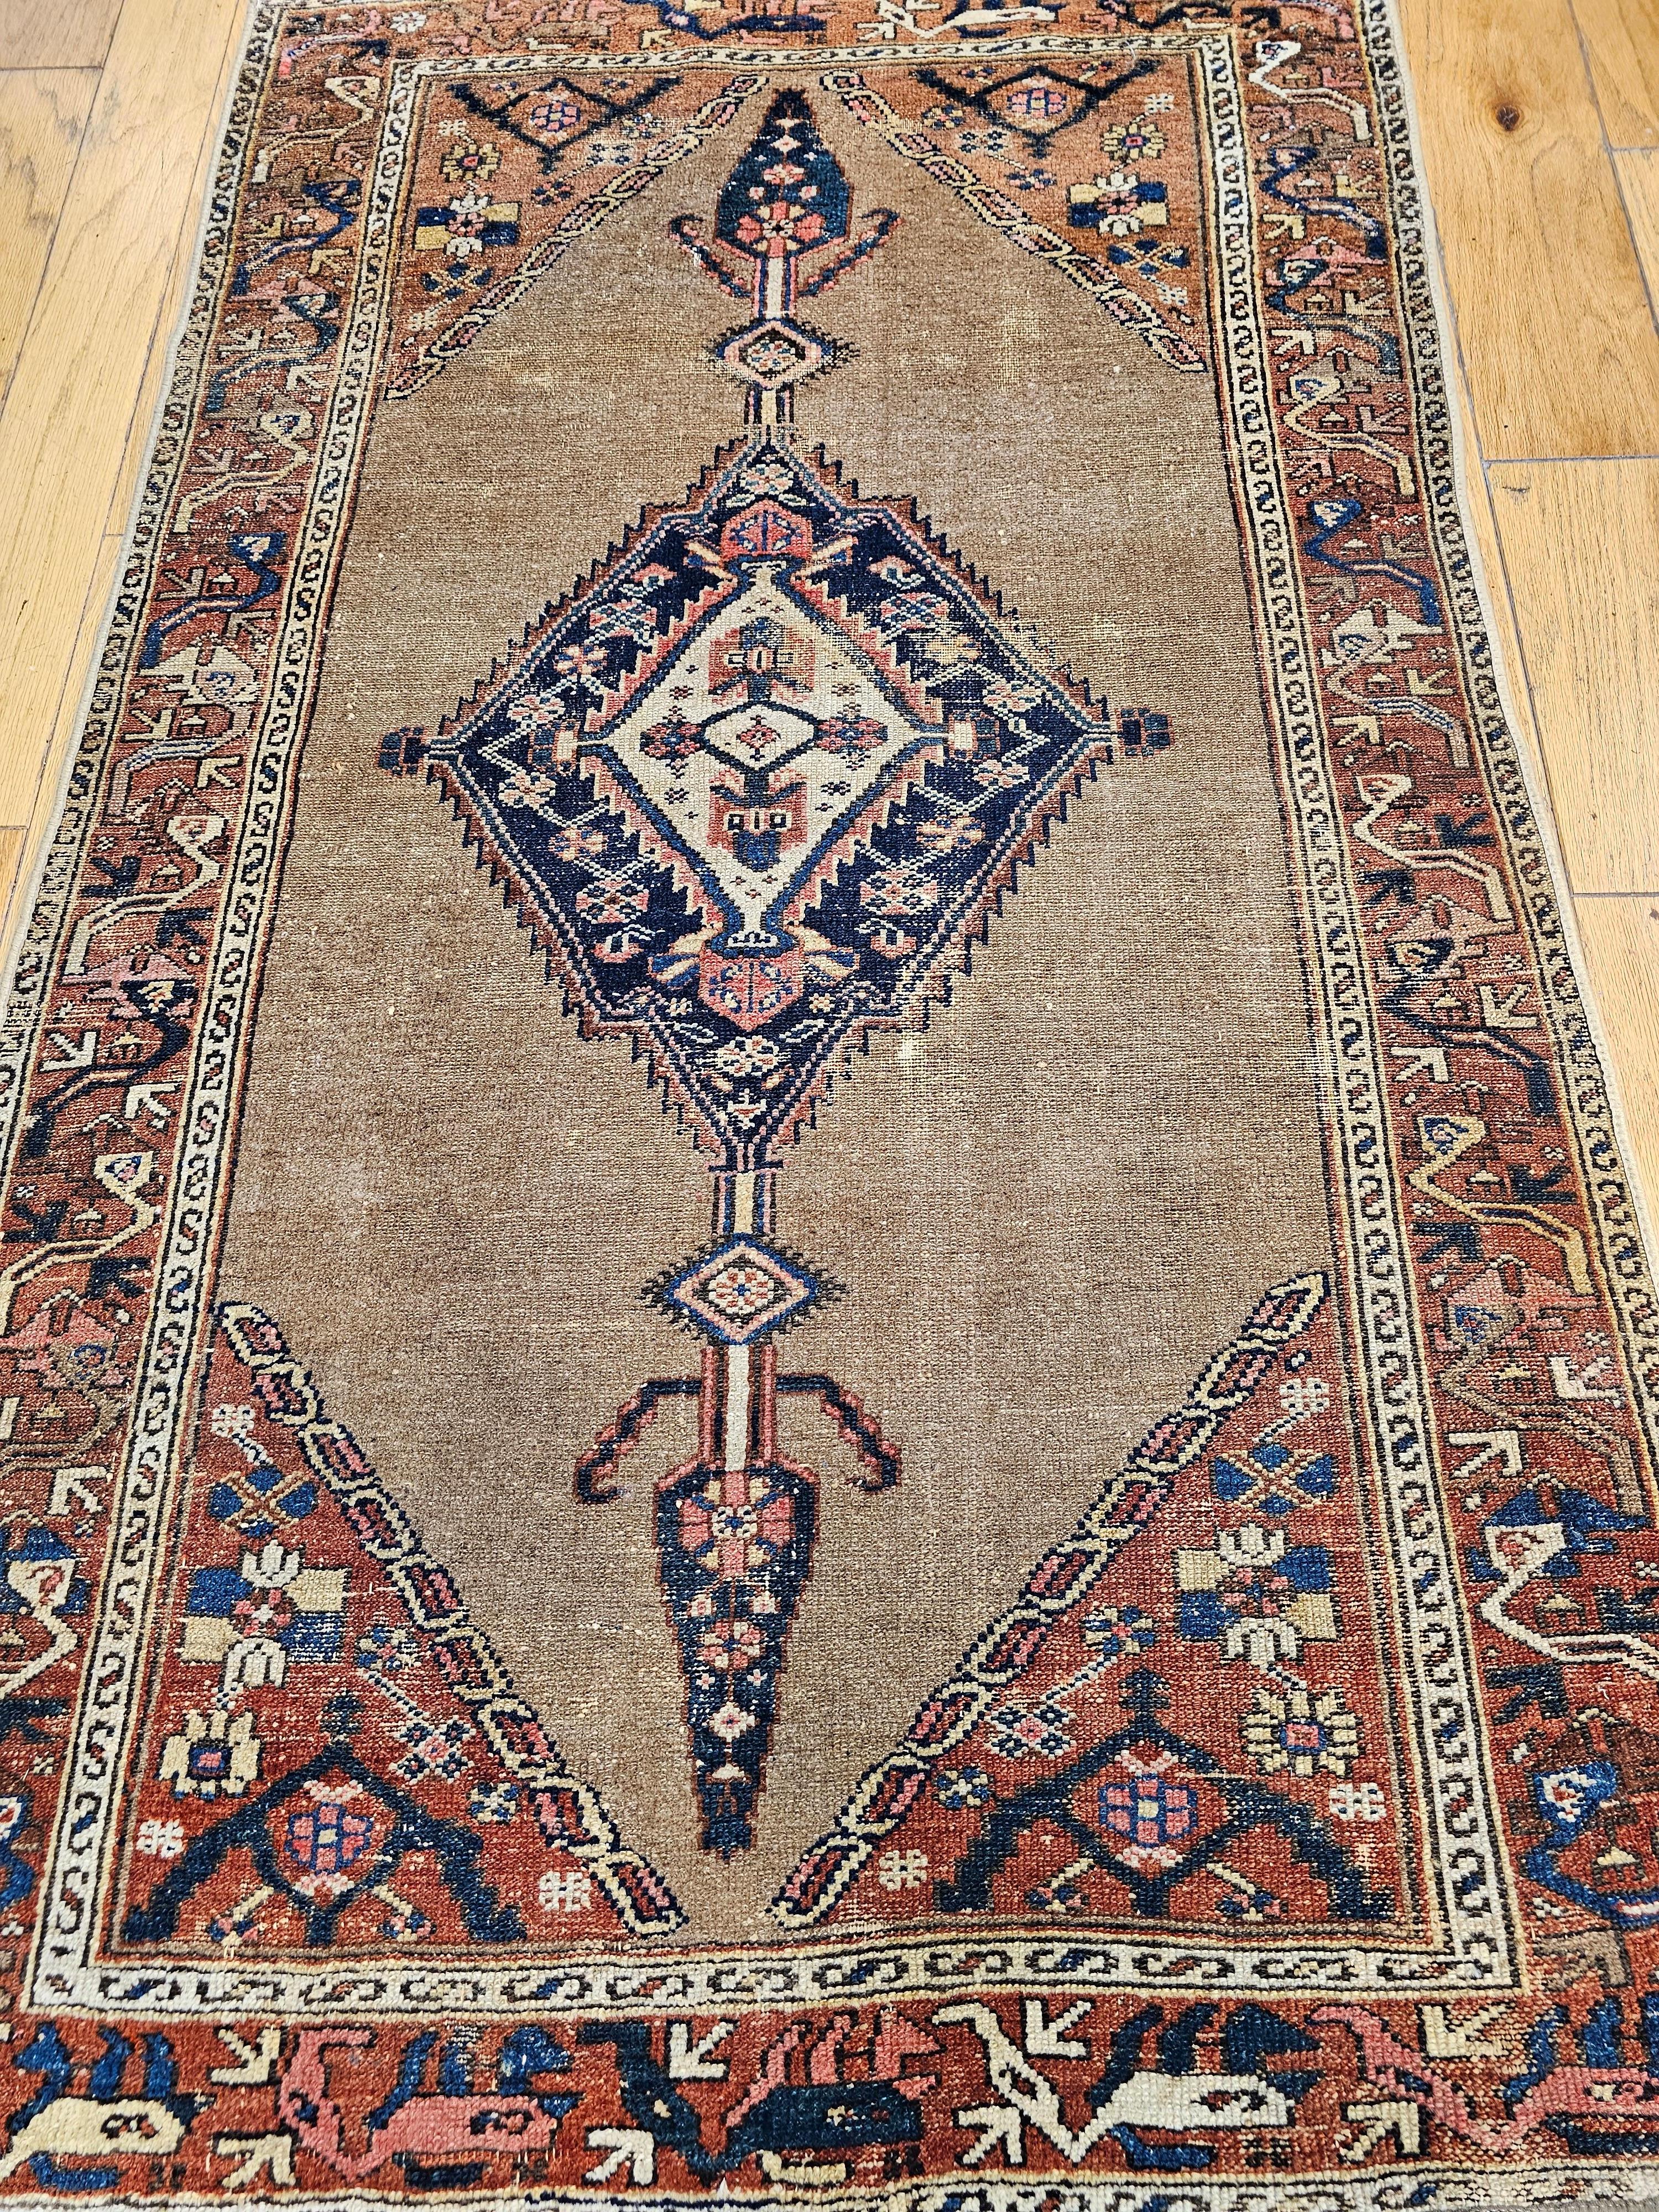 Vintage Persian Camelhair Malayer Area Rug in Camel, Navy, Ivory, Rust Red, Blue For Sale 13